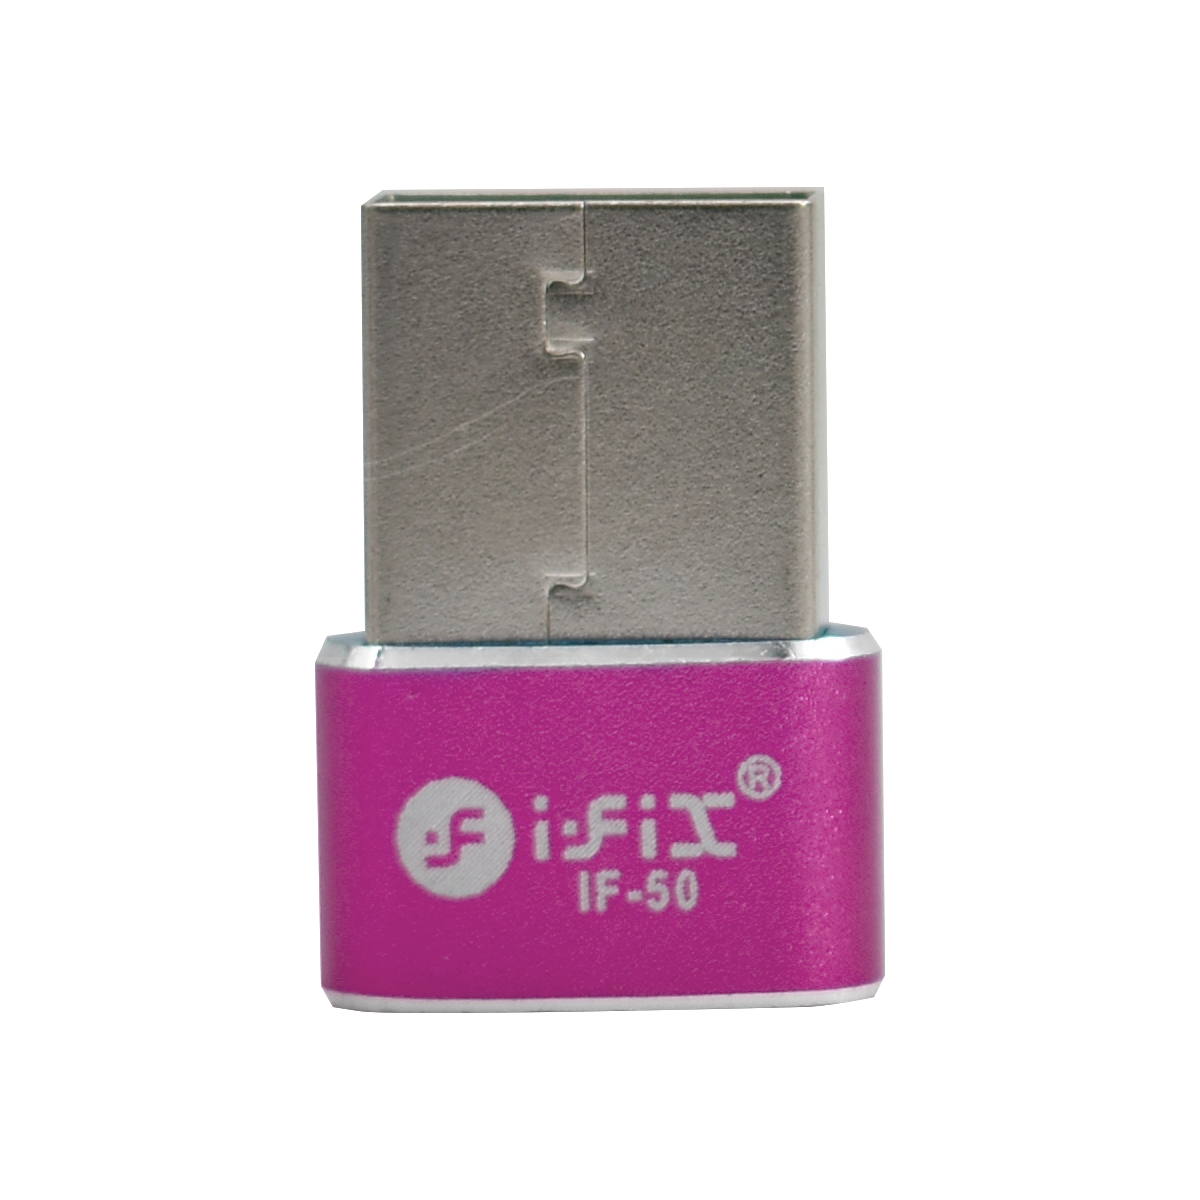 iFiX IF-50 Super fast Plug & Play  PD Connector (Pink)